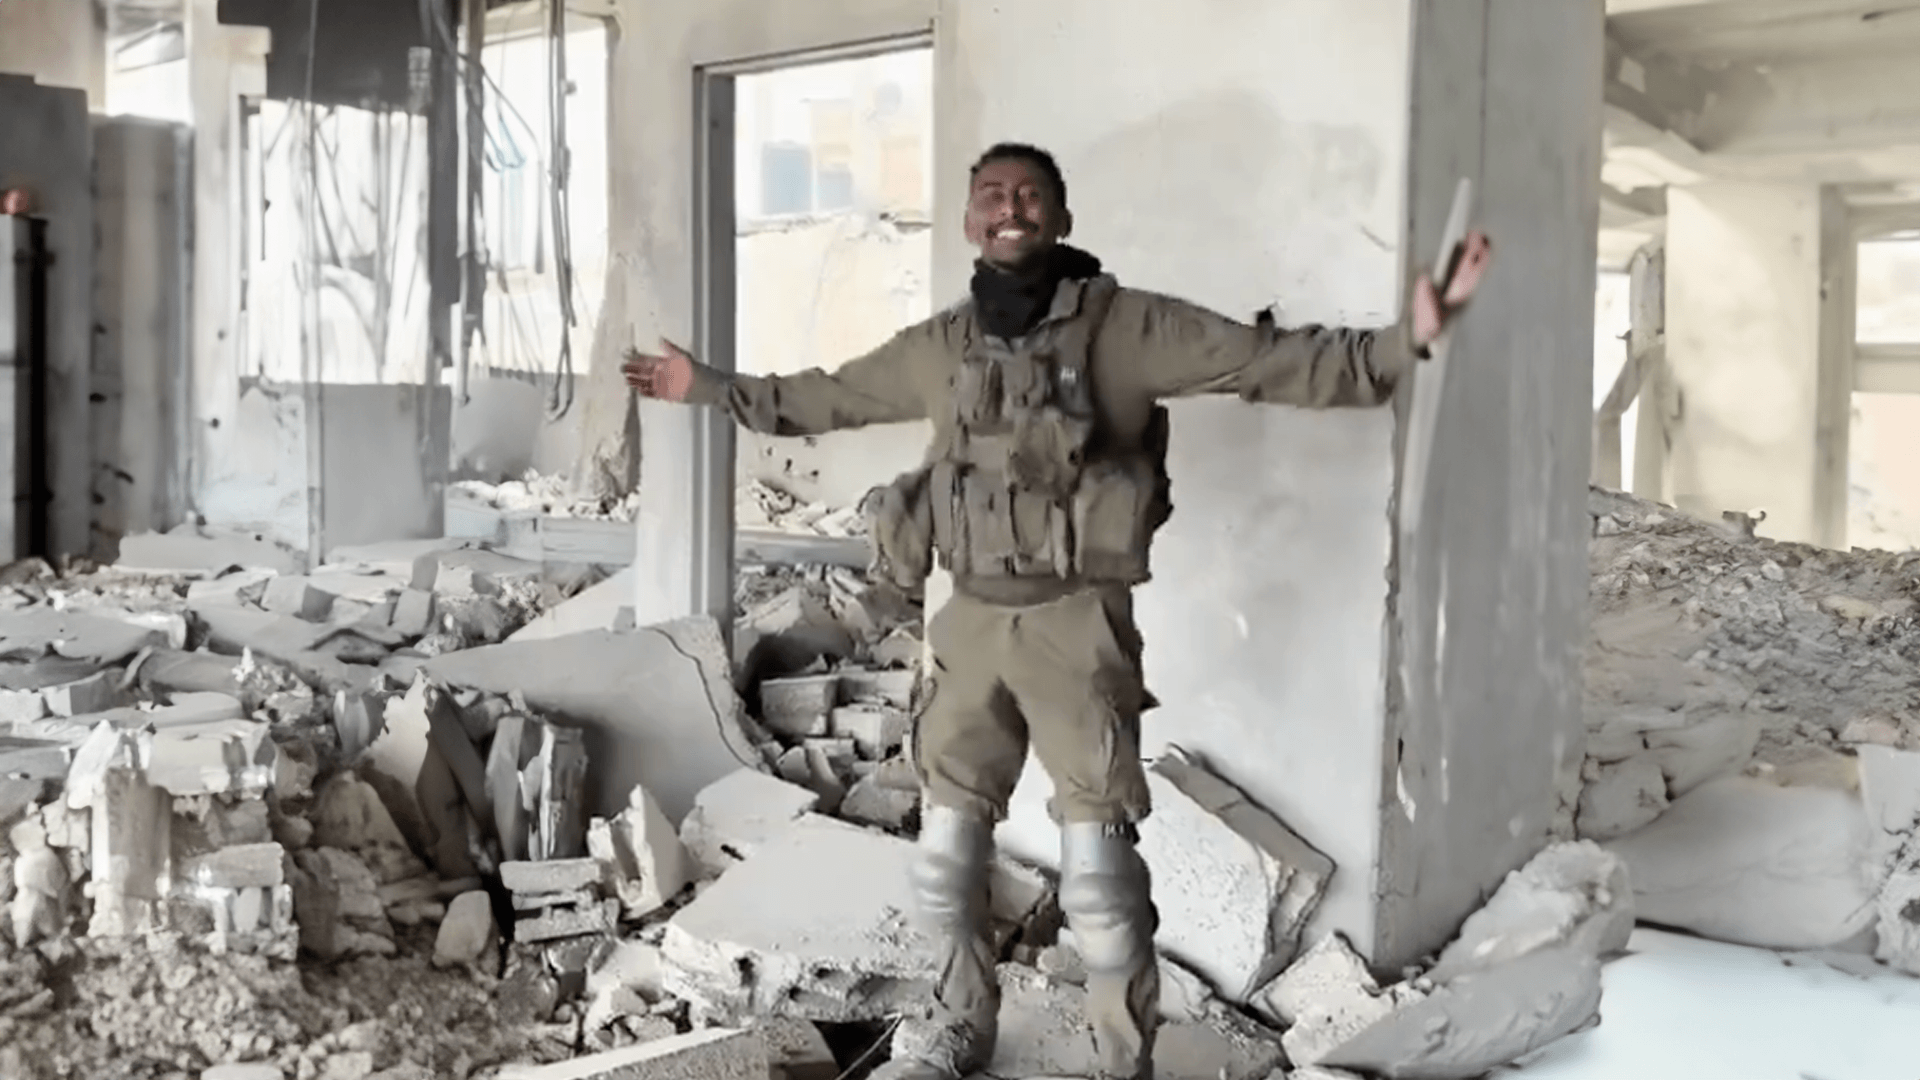 An Ethiopian soldier in the Israeli forces recorded himself dancing inside a destroyed home in Gaza